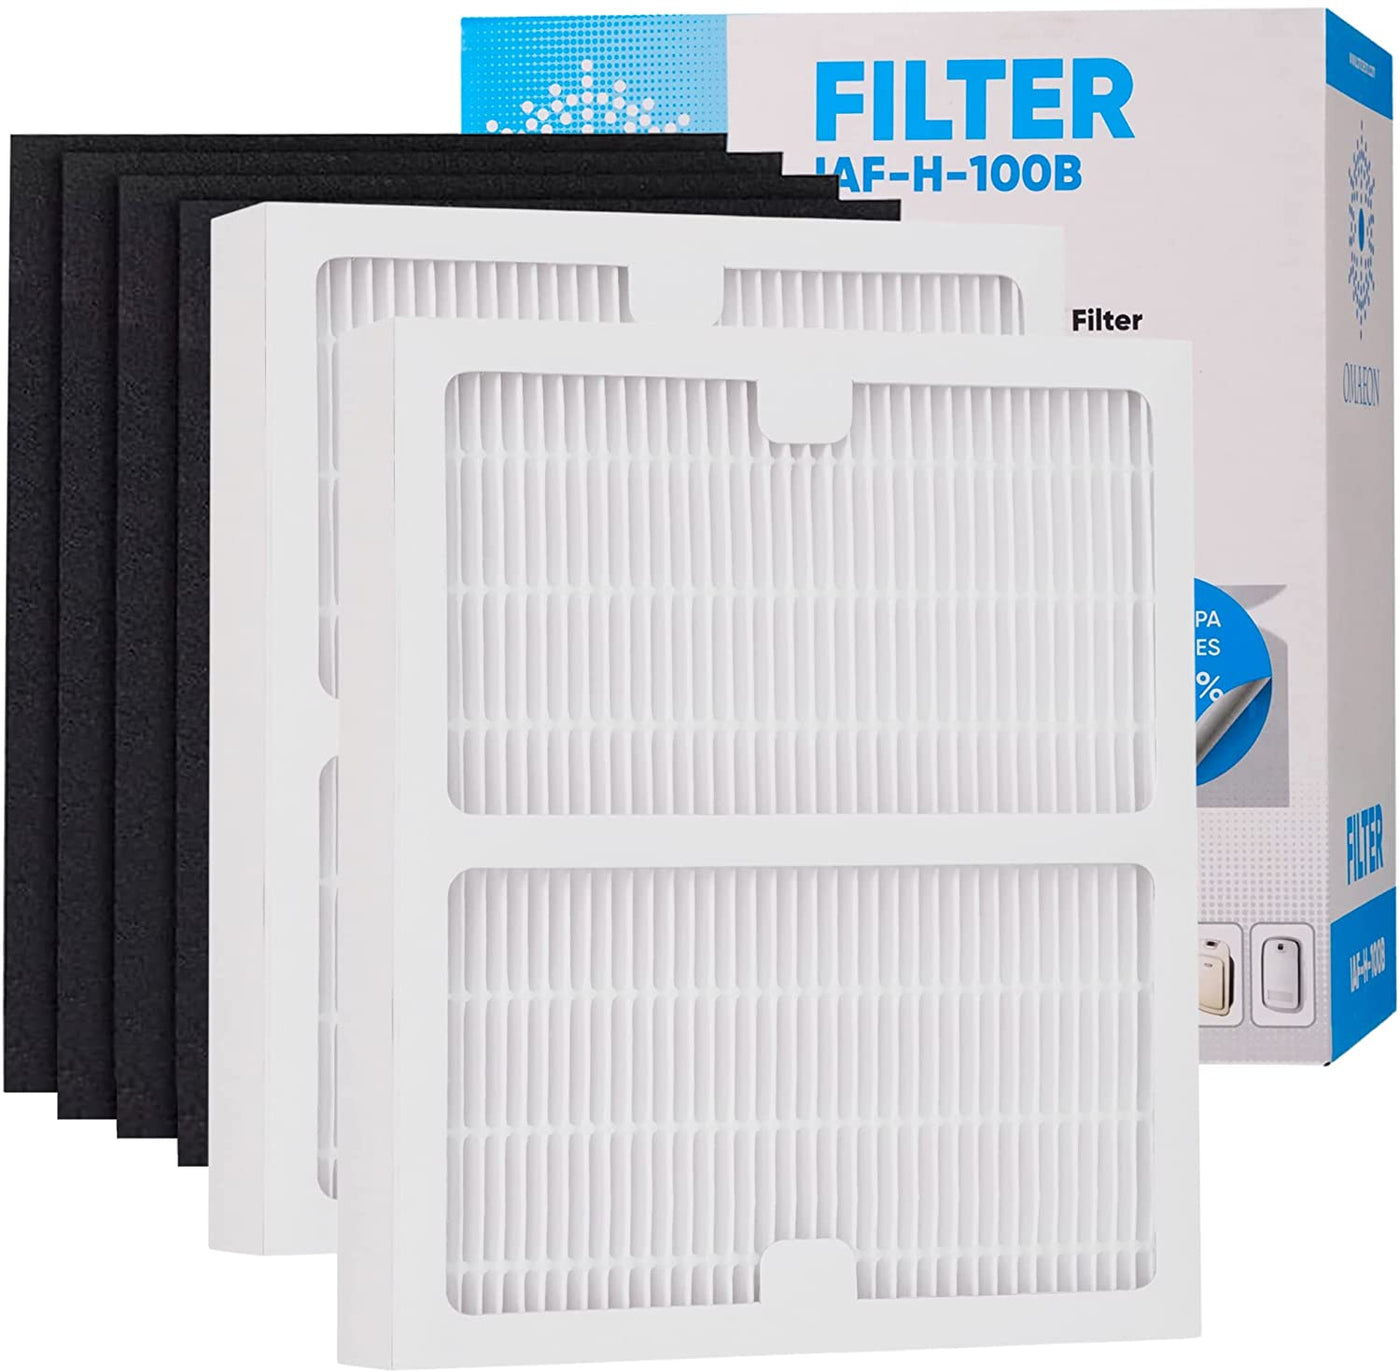 Idylis replacement filter B compatible with Idylis Air Purifier, Part # IAF-H-100B